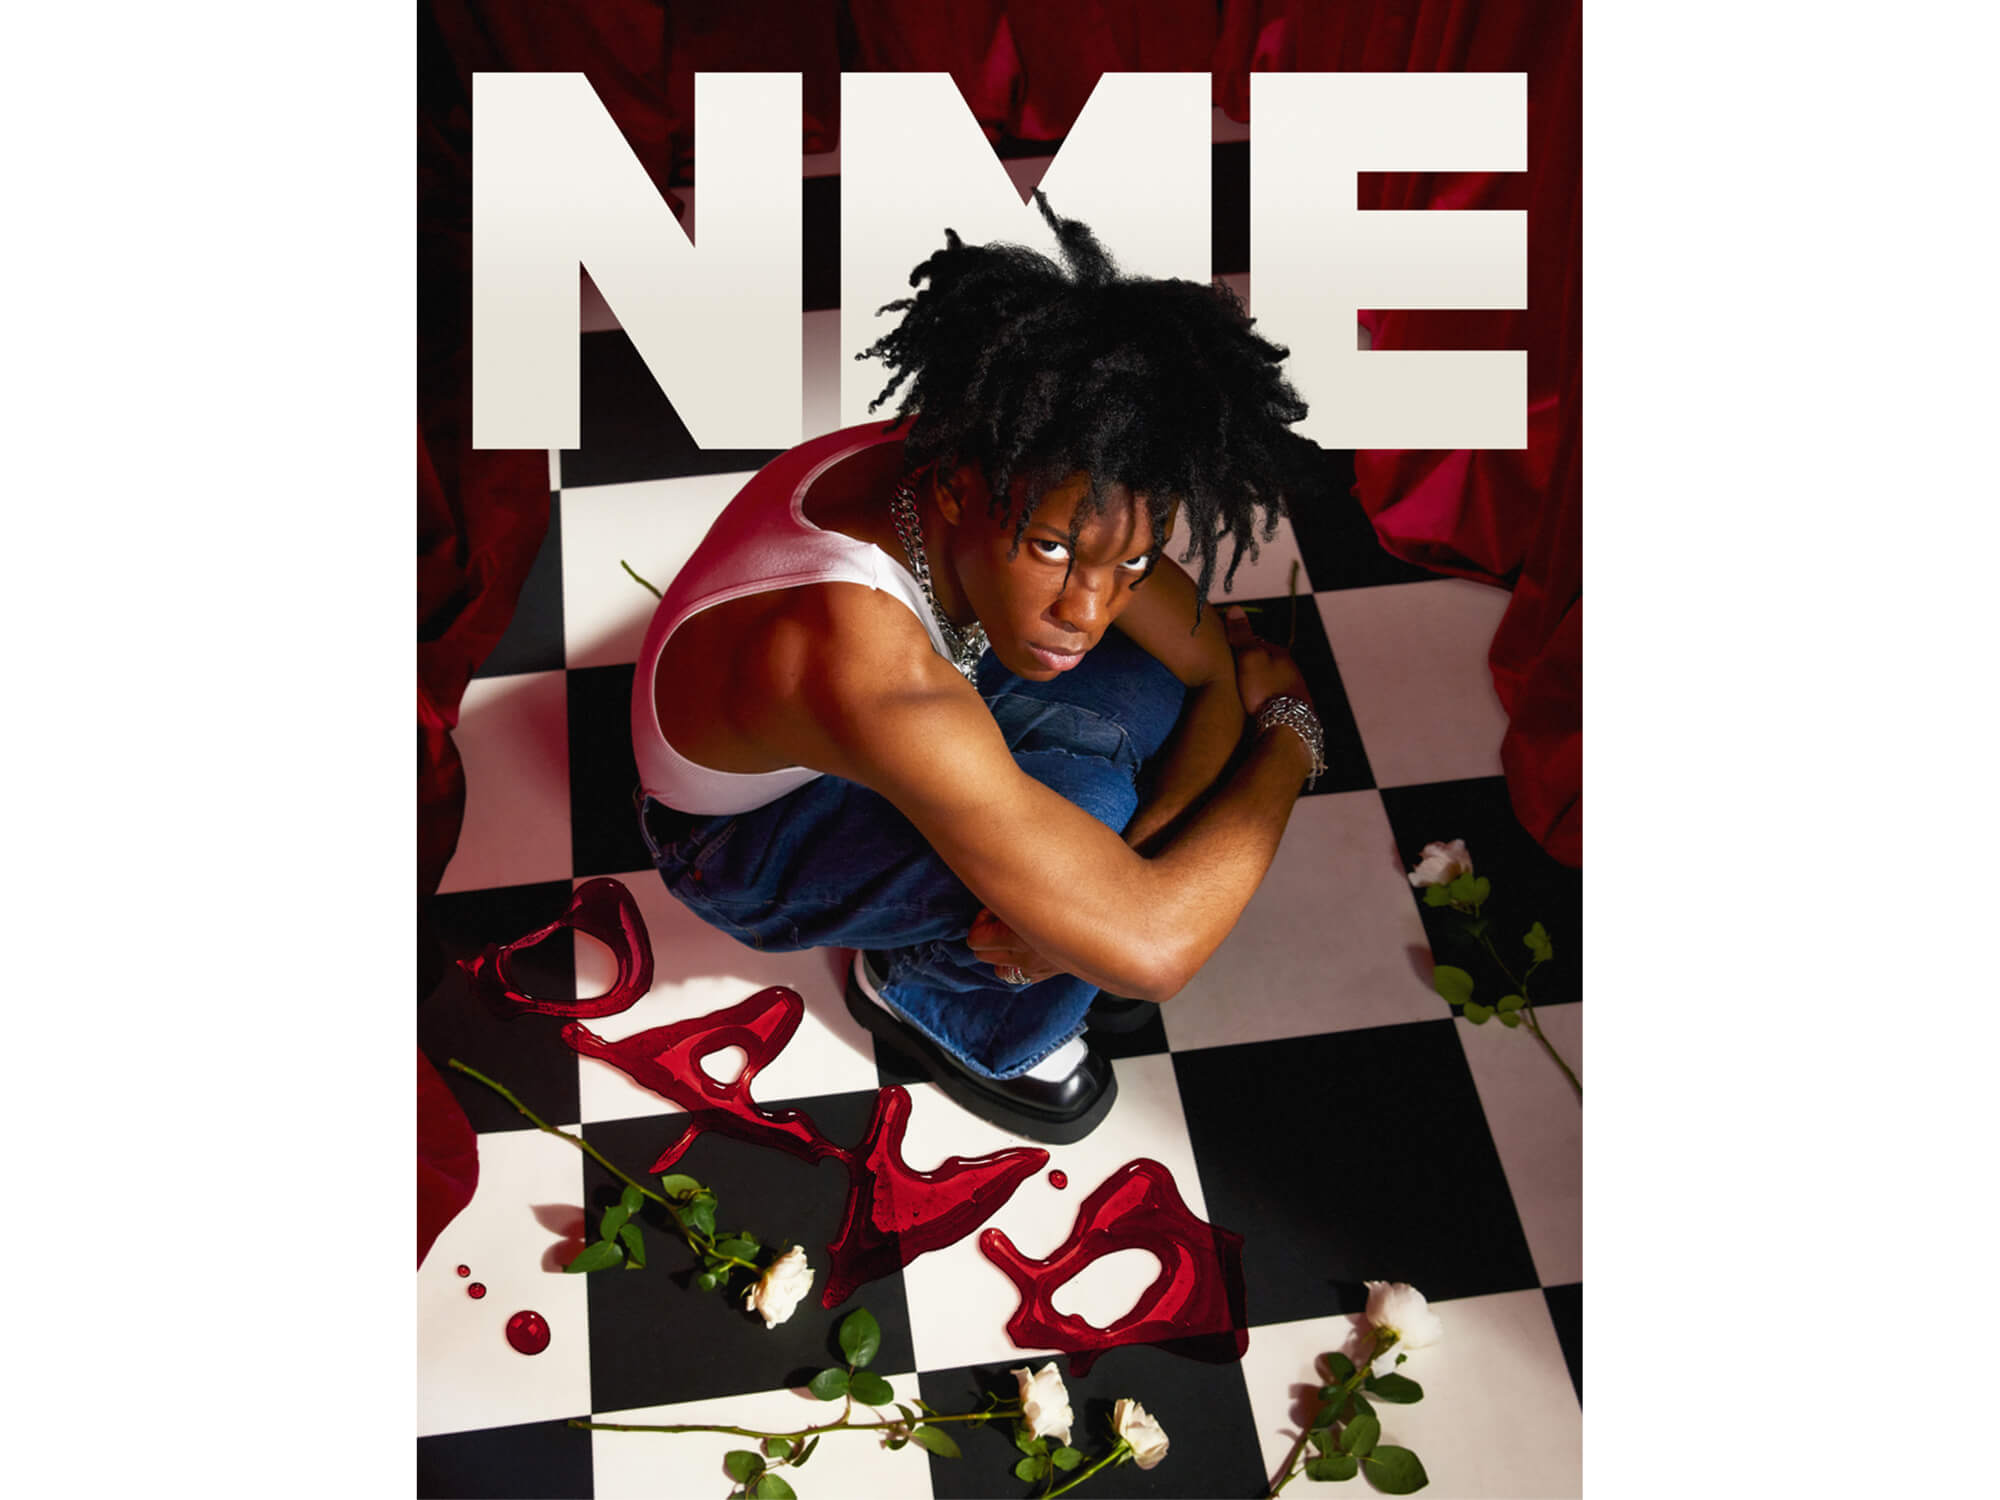 d4vd NME - The Cover - credit Jonathan Weiner for NME